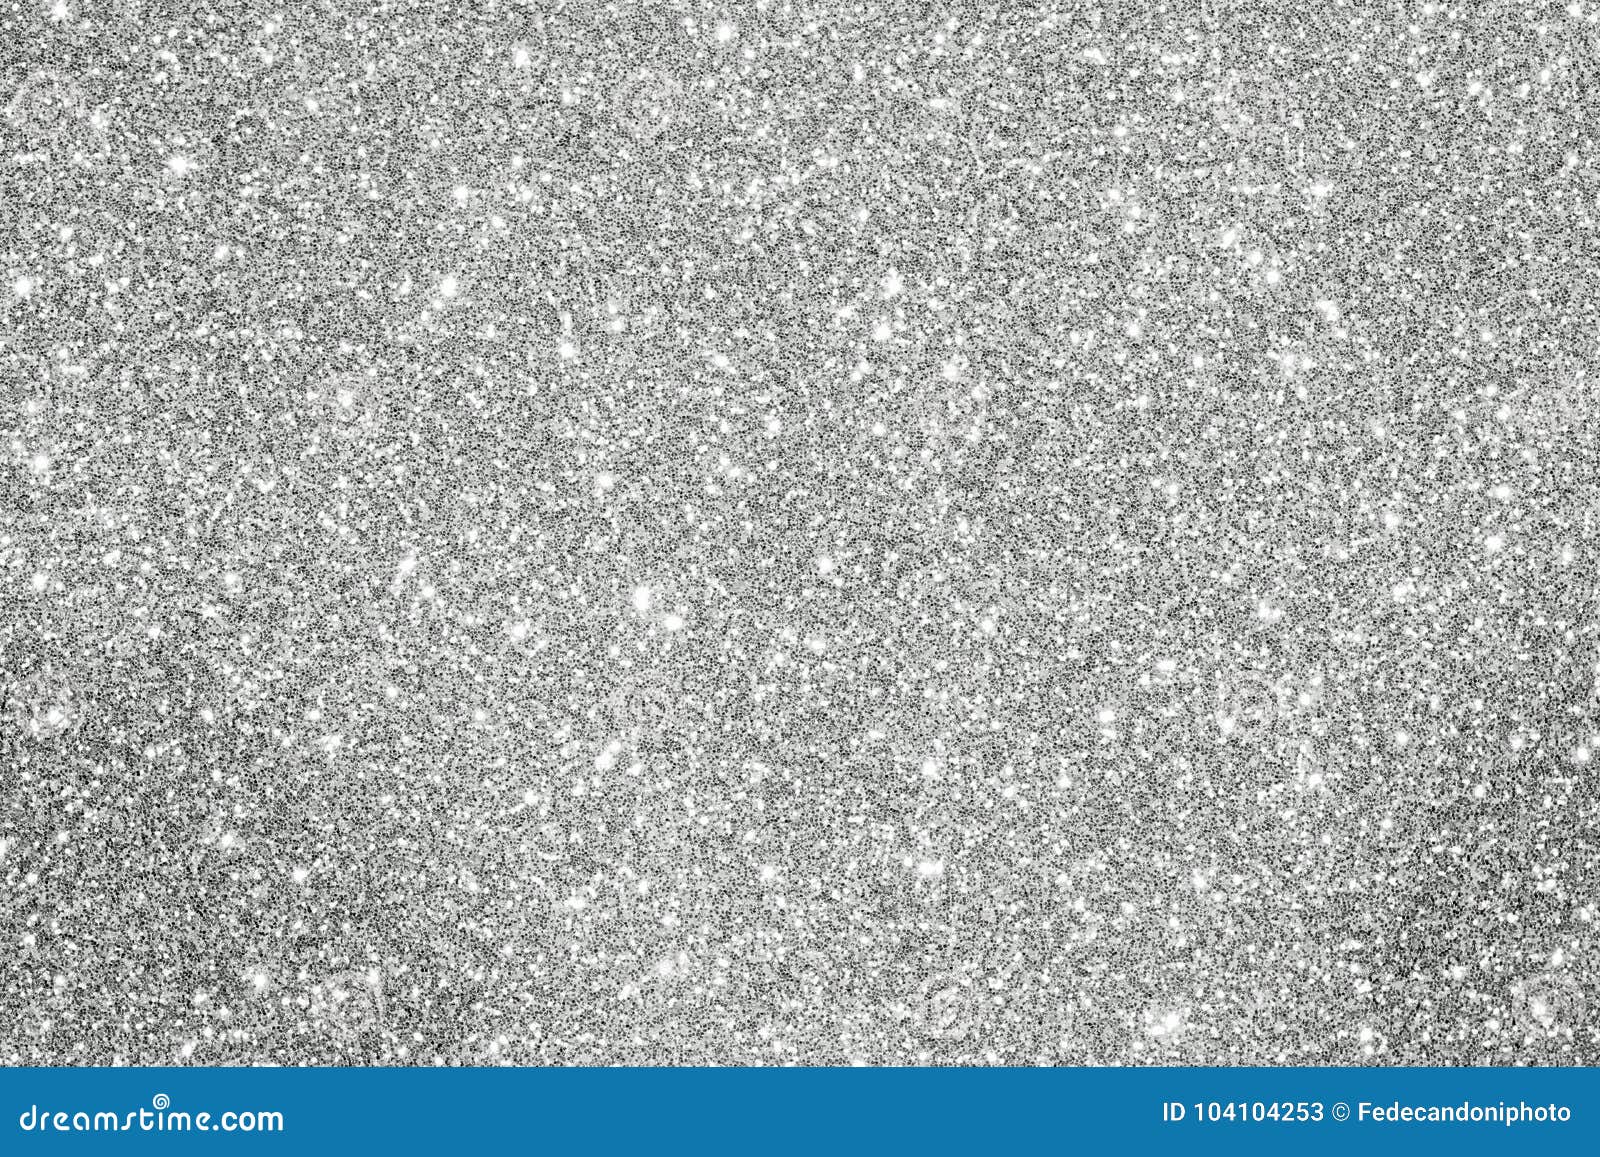 Glittery Background Bright Shiny Silver Color Stock Image - Image of  backdrop, bright: 104104253